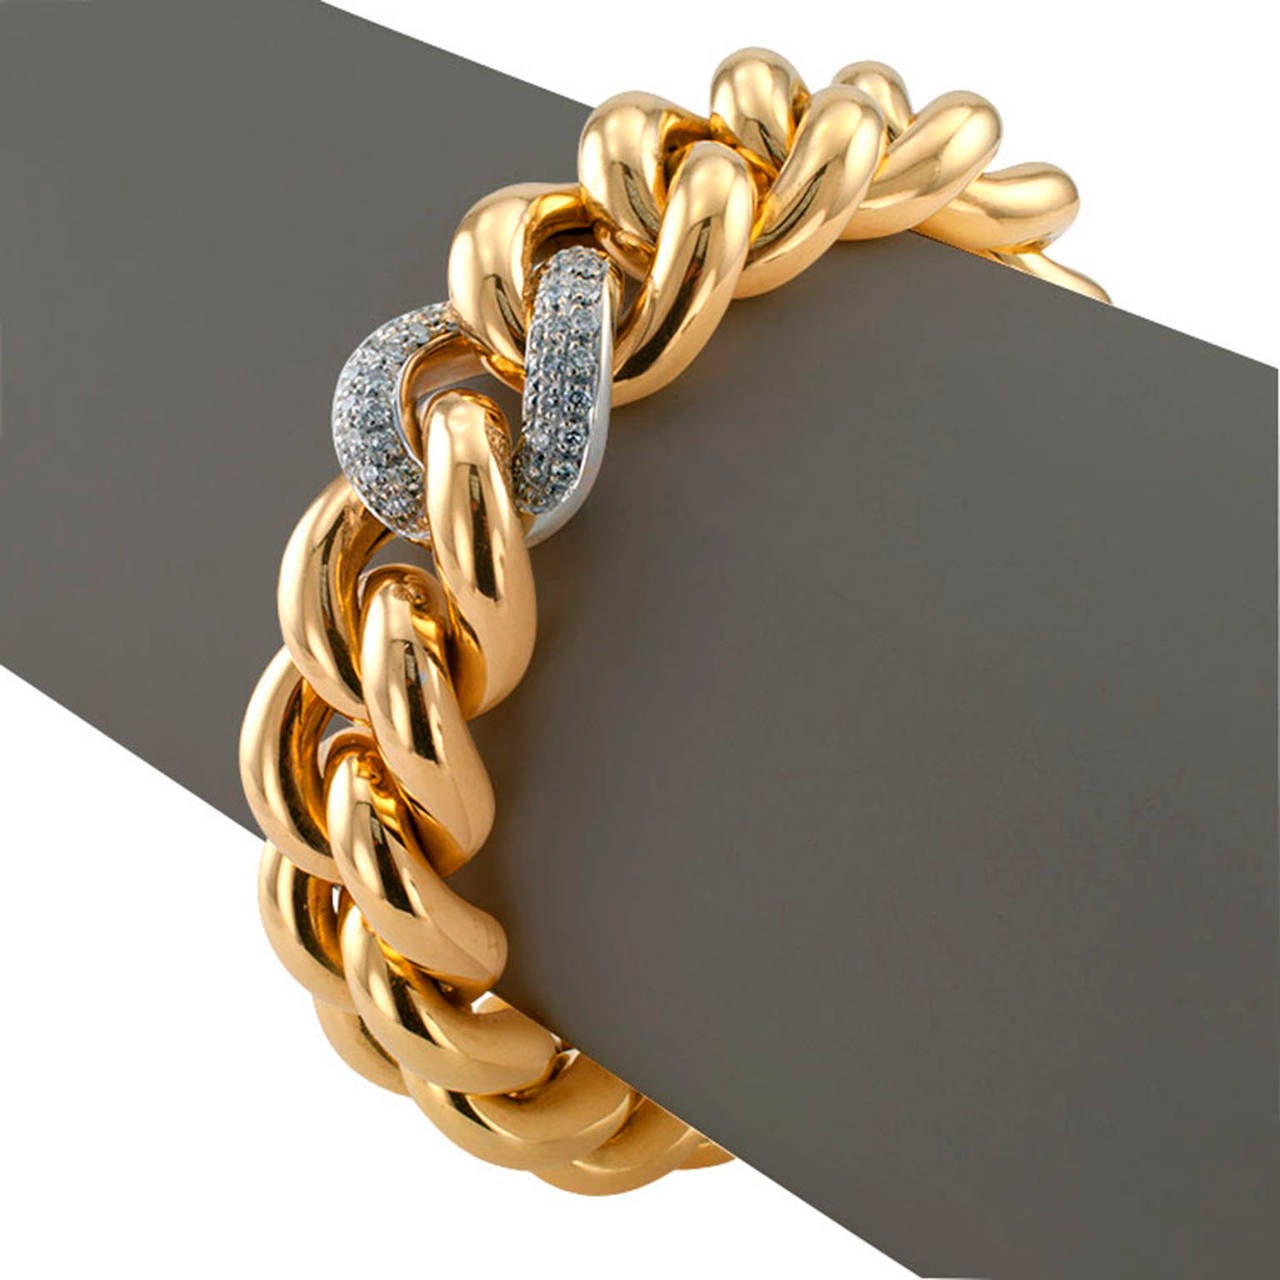 Nicolis Cola Chunky Link Gold and Diamond Bracelet

Chunky link bracelet, circa 2000.  A marvelous design that looks and feels great.  Just so... so elegant, so smart, so good on the wrist, a strong contender for 